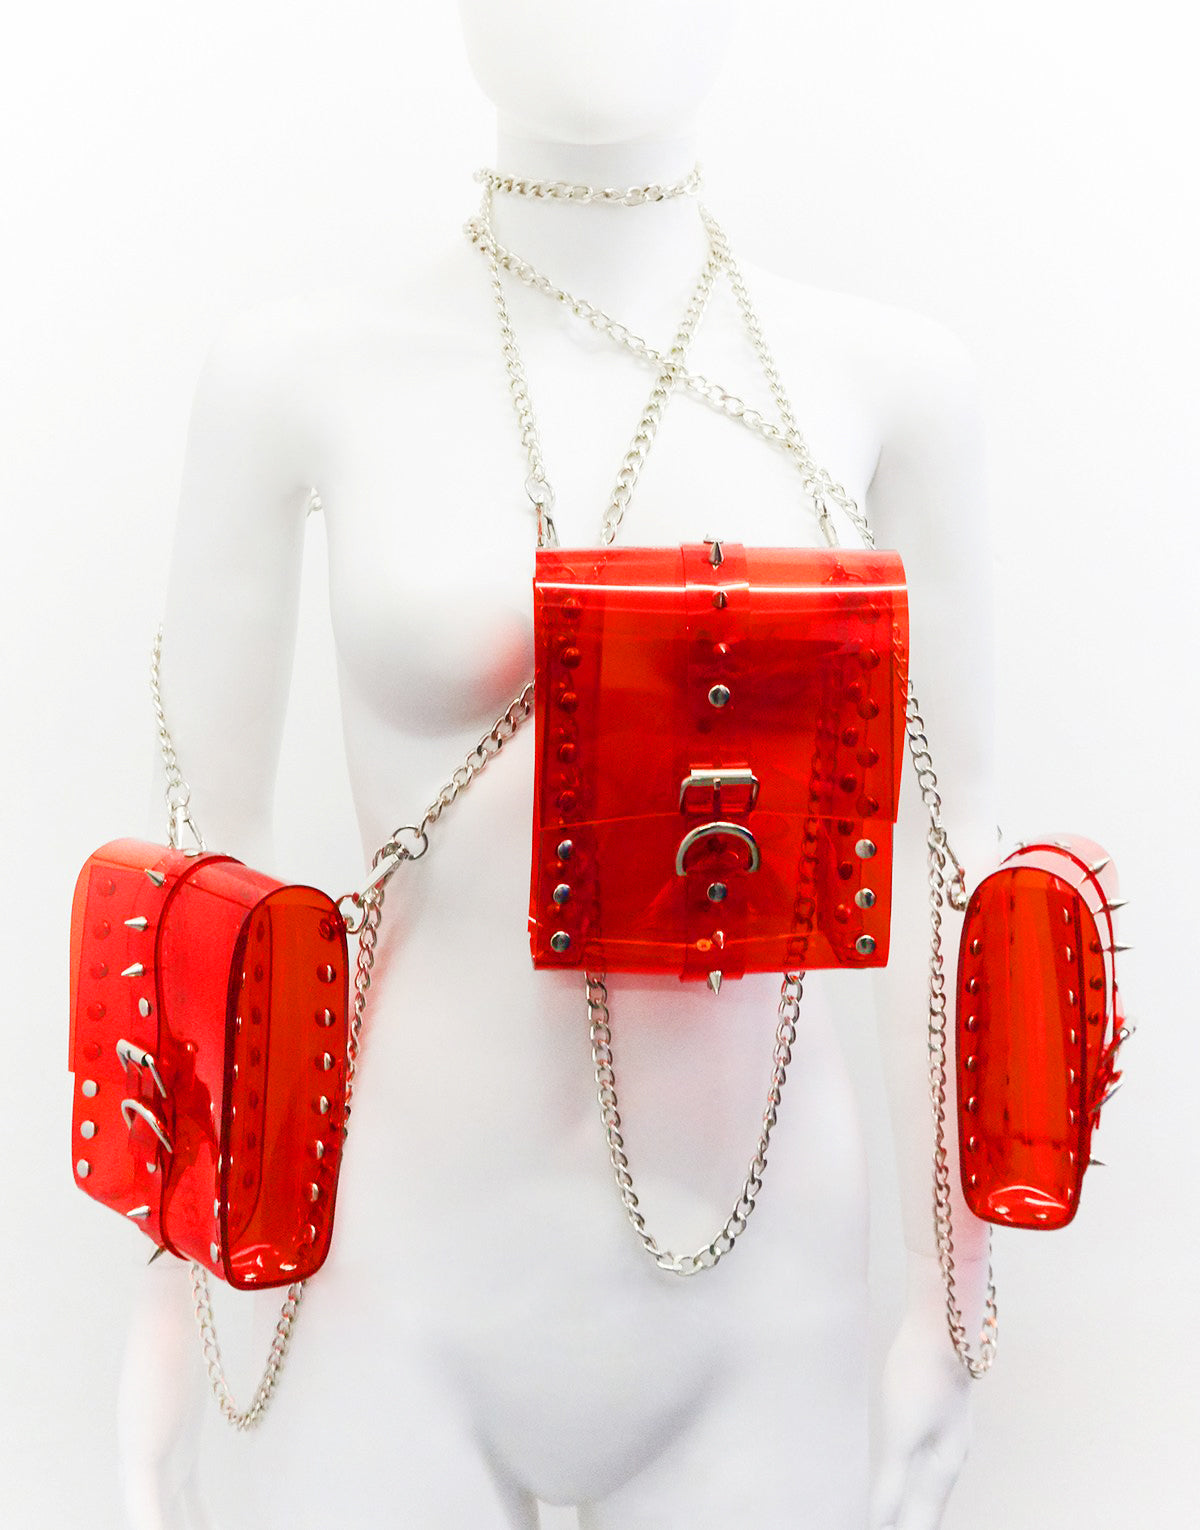 Jivomir Domoustchiev The Dream Collector Bag clear redJivomir Domoustchiev The Dream Collector Bag clear red vegan vinyl studded chain purse collectible handbag